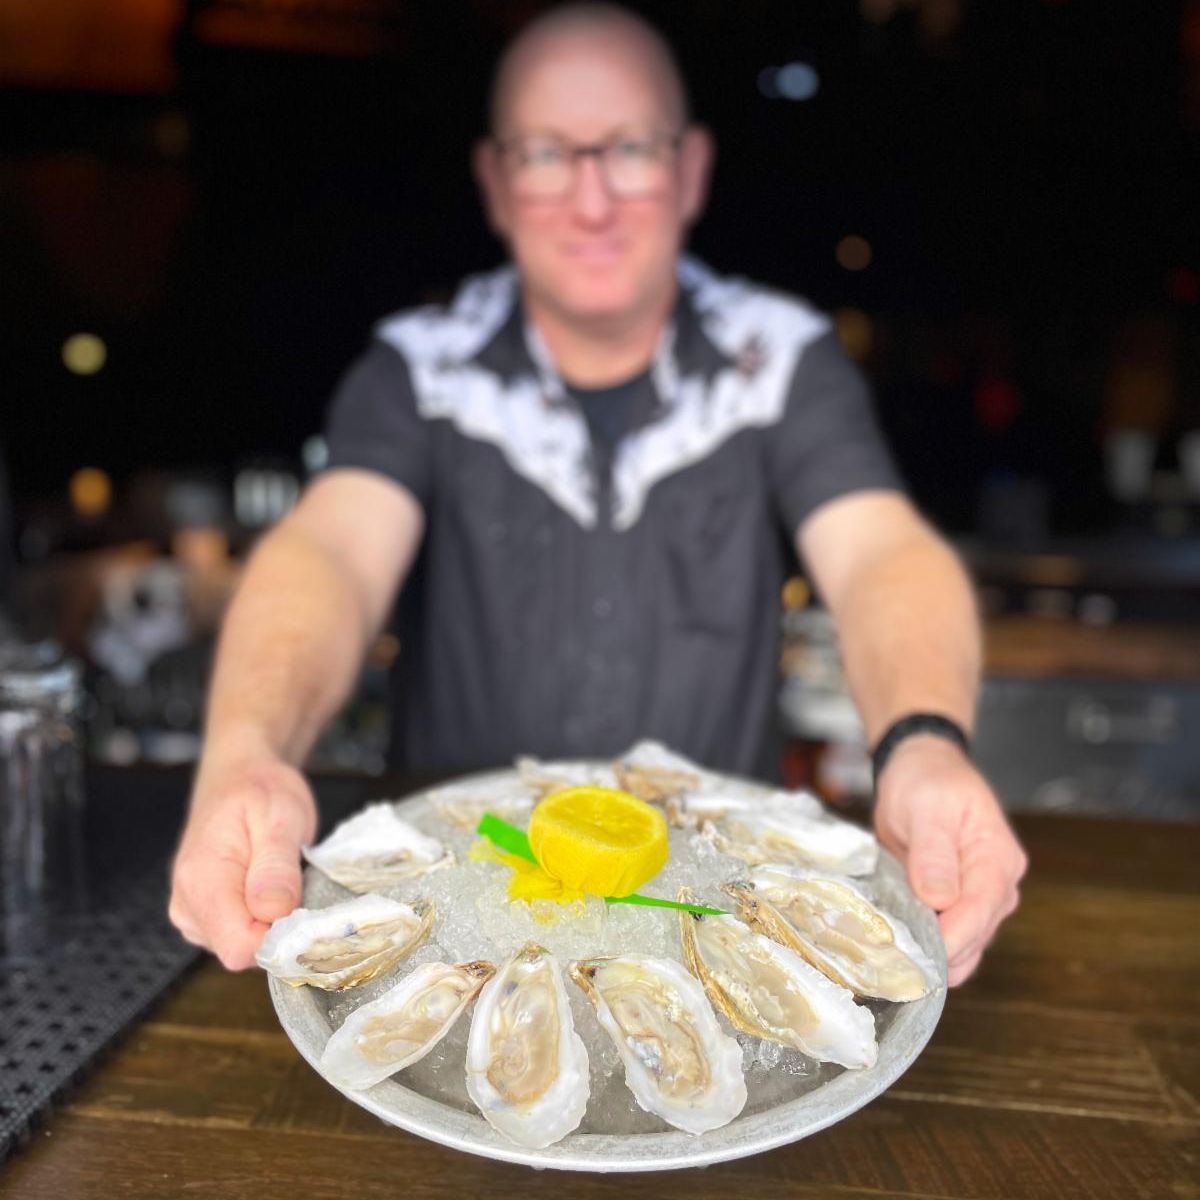 Indulging in the briny goodness of Oyster Wednesday at Voodoo Bayou! Dive into a sea of flavor and let your taste buds tango with these oceanic delights. Don't miss out on this weekly shuckin' sensation! 🌊🦪

#VoodooBayou #OysterWednesday #ShuckYeah